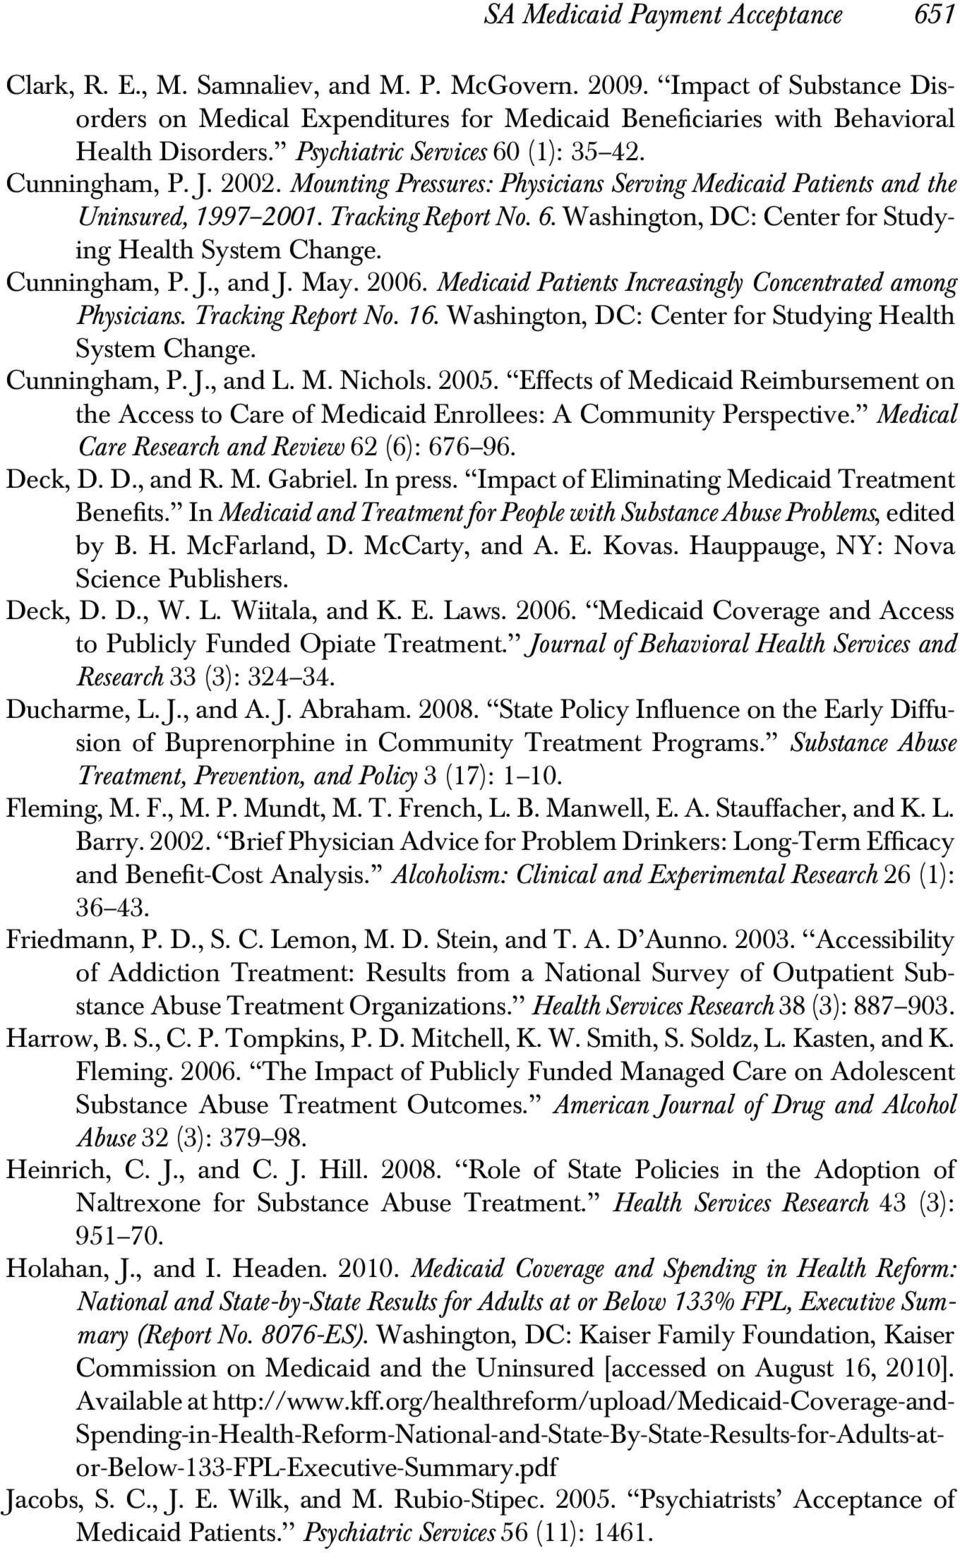 Mounting Pressures: Physicians Serving Medicaid Patients and the Uninsured, 1997 2001. Tracking Report No. 6. Washington, DC: Center for Studying Health System Change. Cunningham, P. J., and J. May.